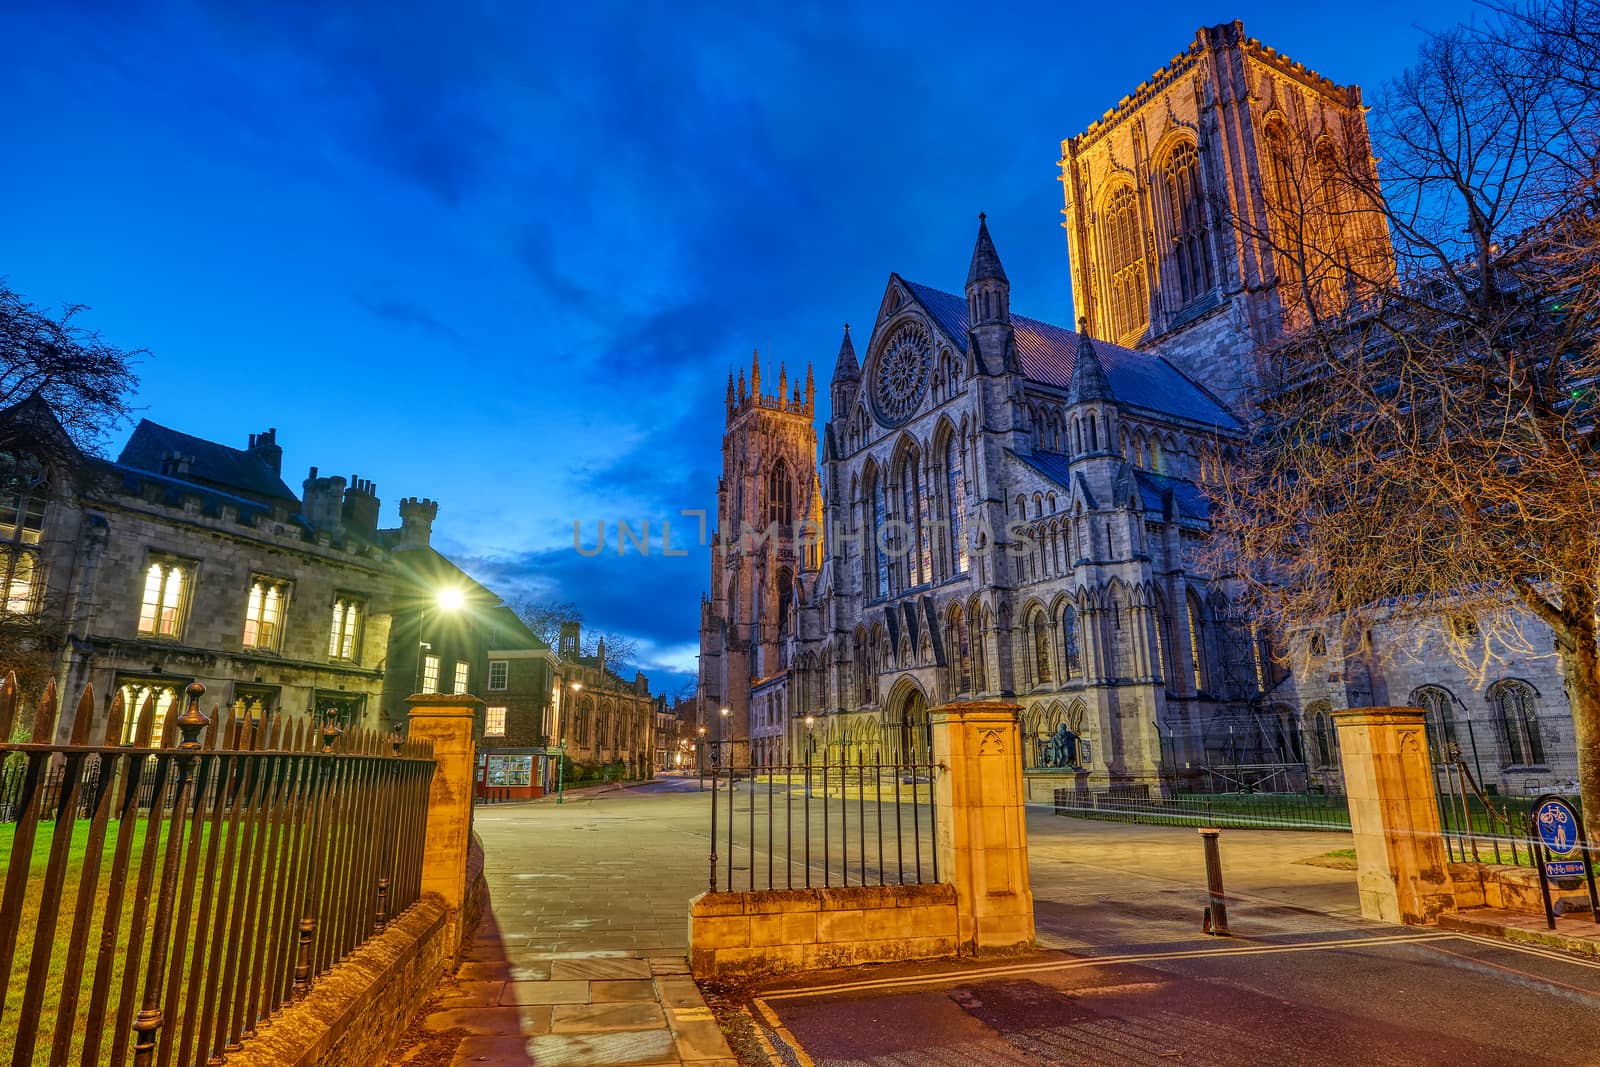 The imposing York Minster in England at night